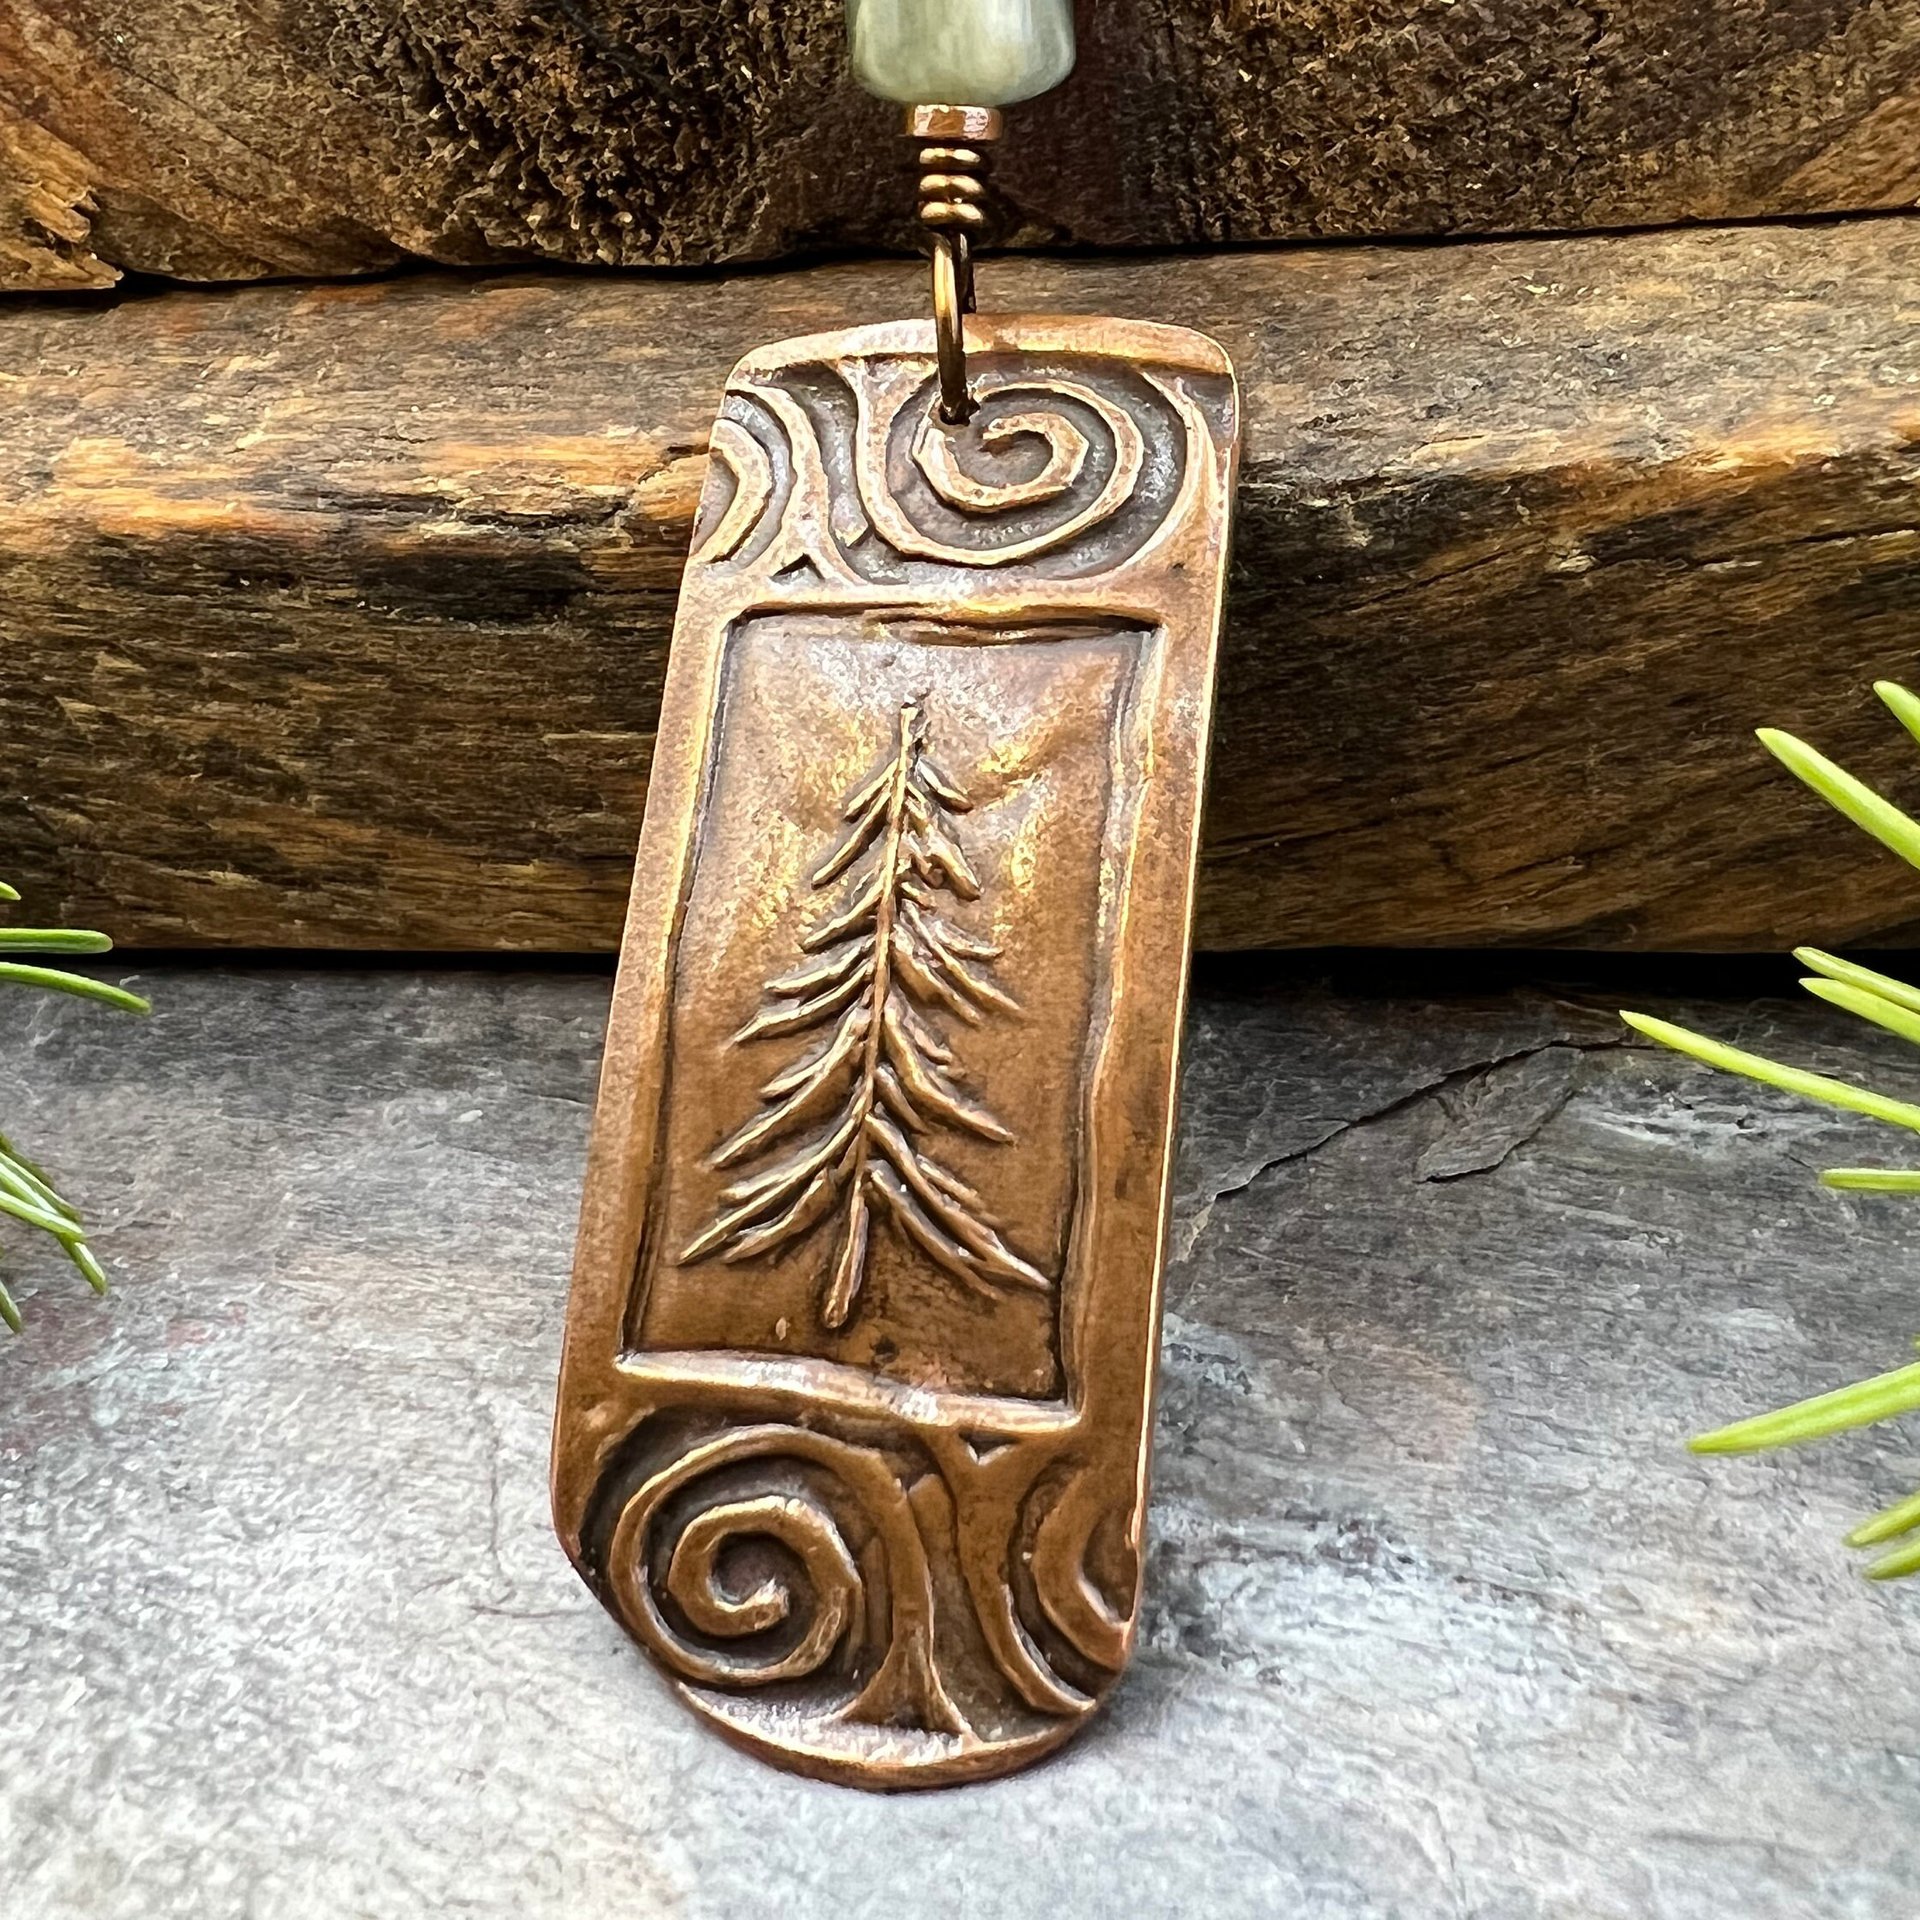 Pine Tree, Copper Pendant, Celtic Spirals, Connemara Marble, Evergreen Trees, Earthy Rustic Art Jewelry, Hand Carved, Tree of Life, Pagan